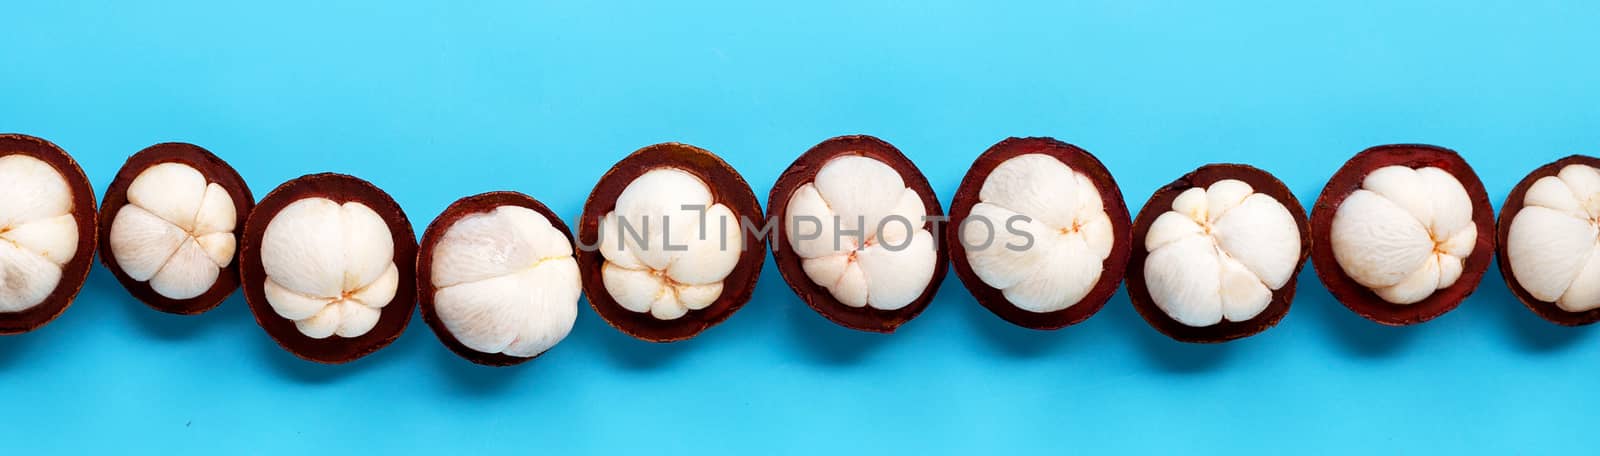 Mangosteen on blue background.  by Bowonpat